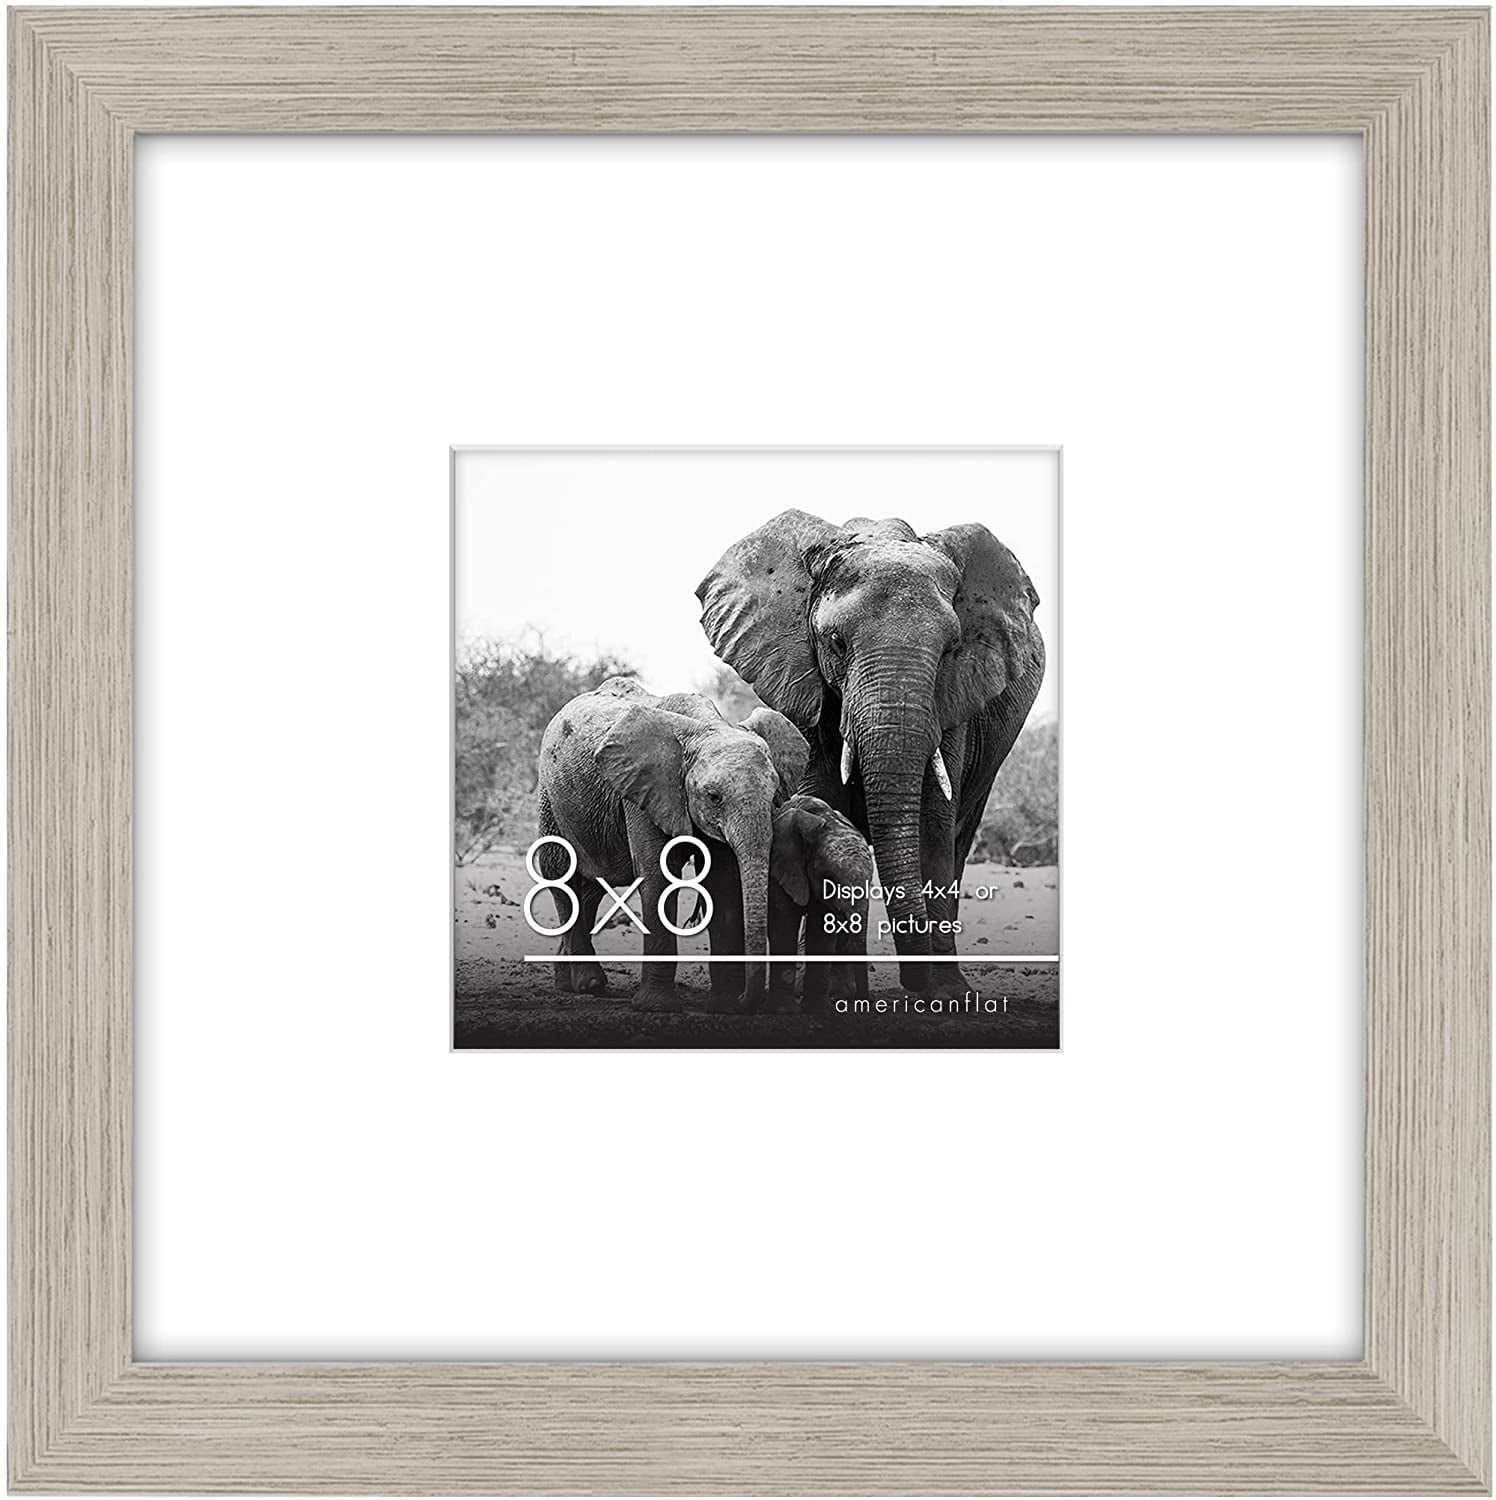  Americanflat 6x6 Picture Frame in Black - Use as 4x4 Picture  Frame with Mat or 6x6 Frame Without Mat - Thin Border Square Picture Frame,  Shatter-Resistant Glass, and Easel for